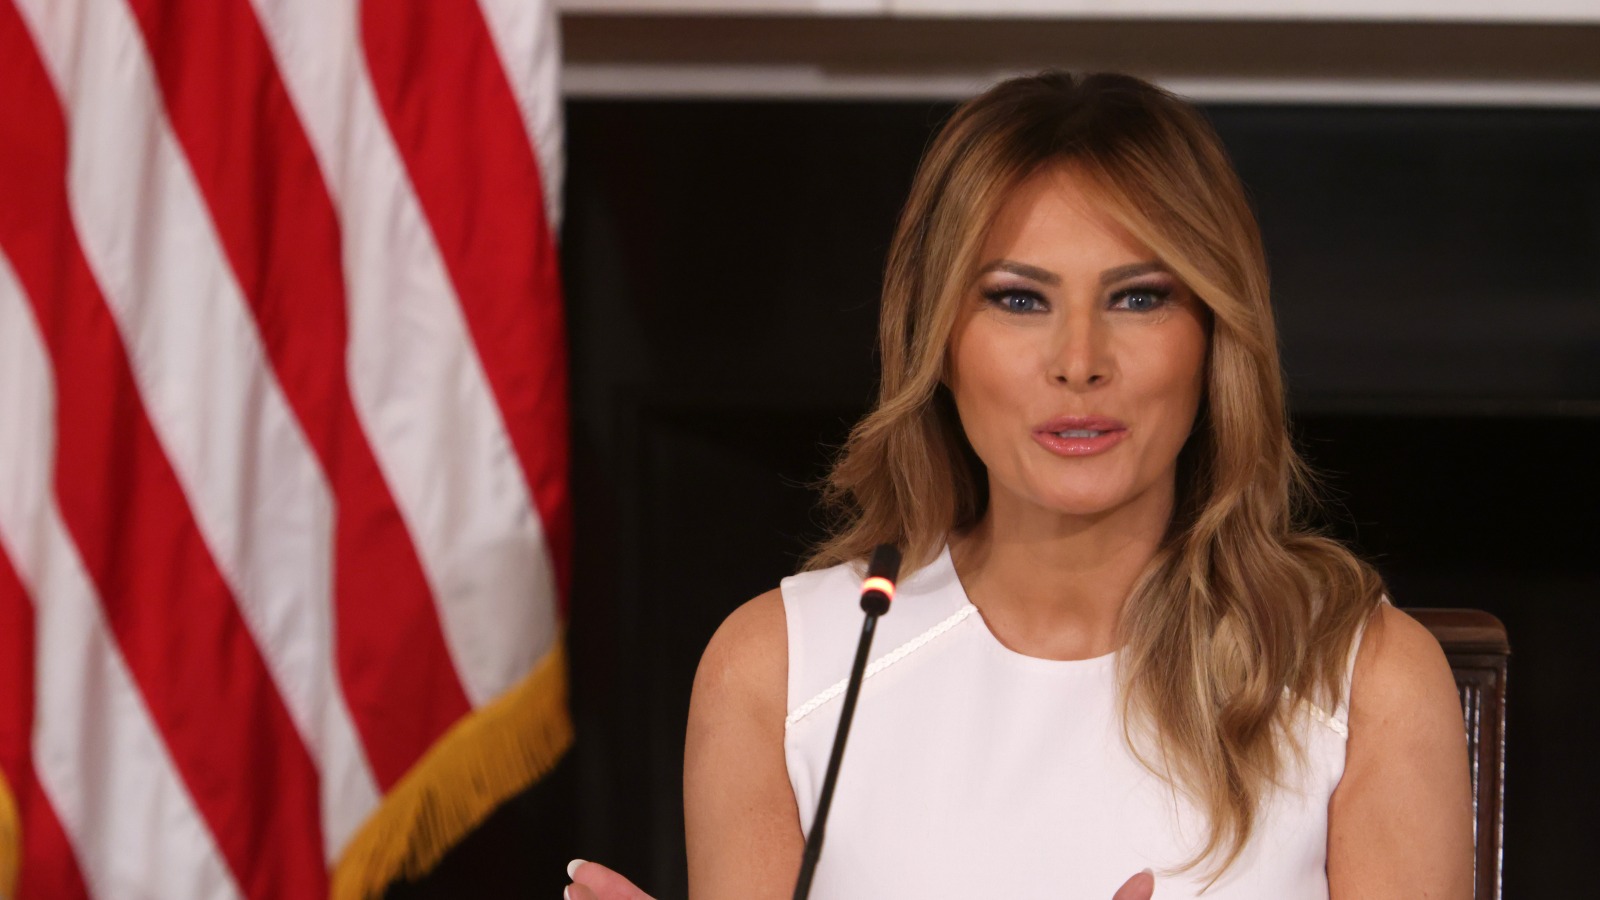 Melania Trump Finally Opens Up About Her Experience With COVID-19